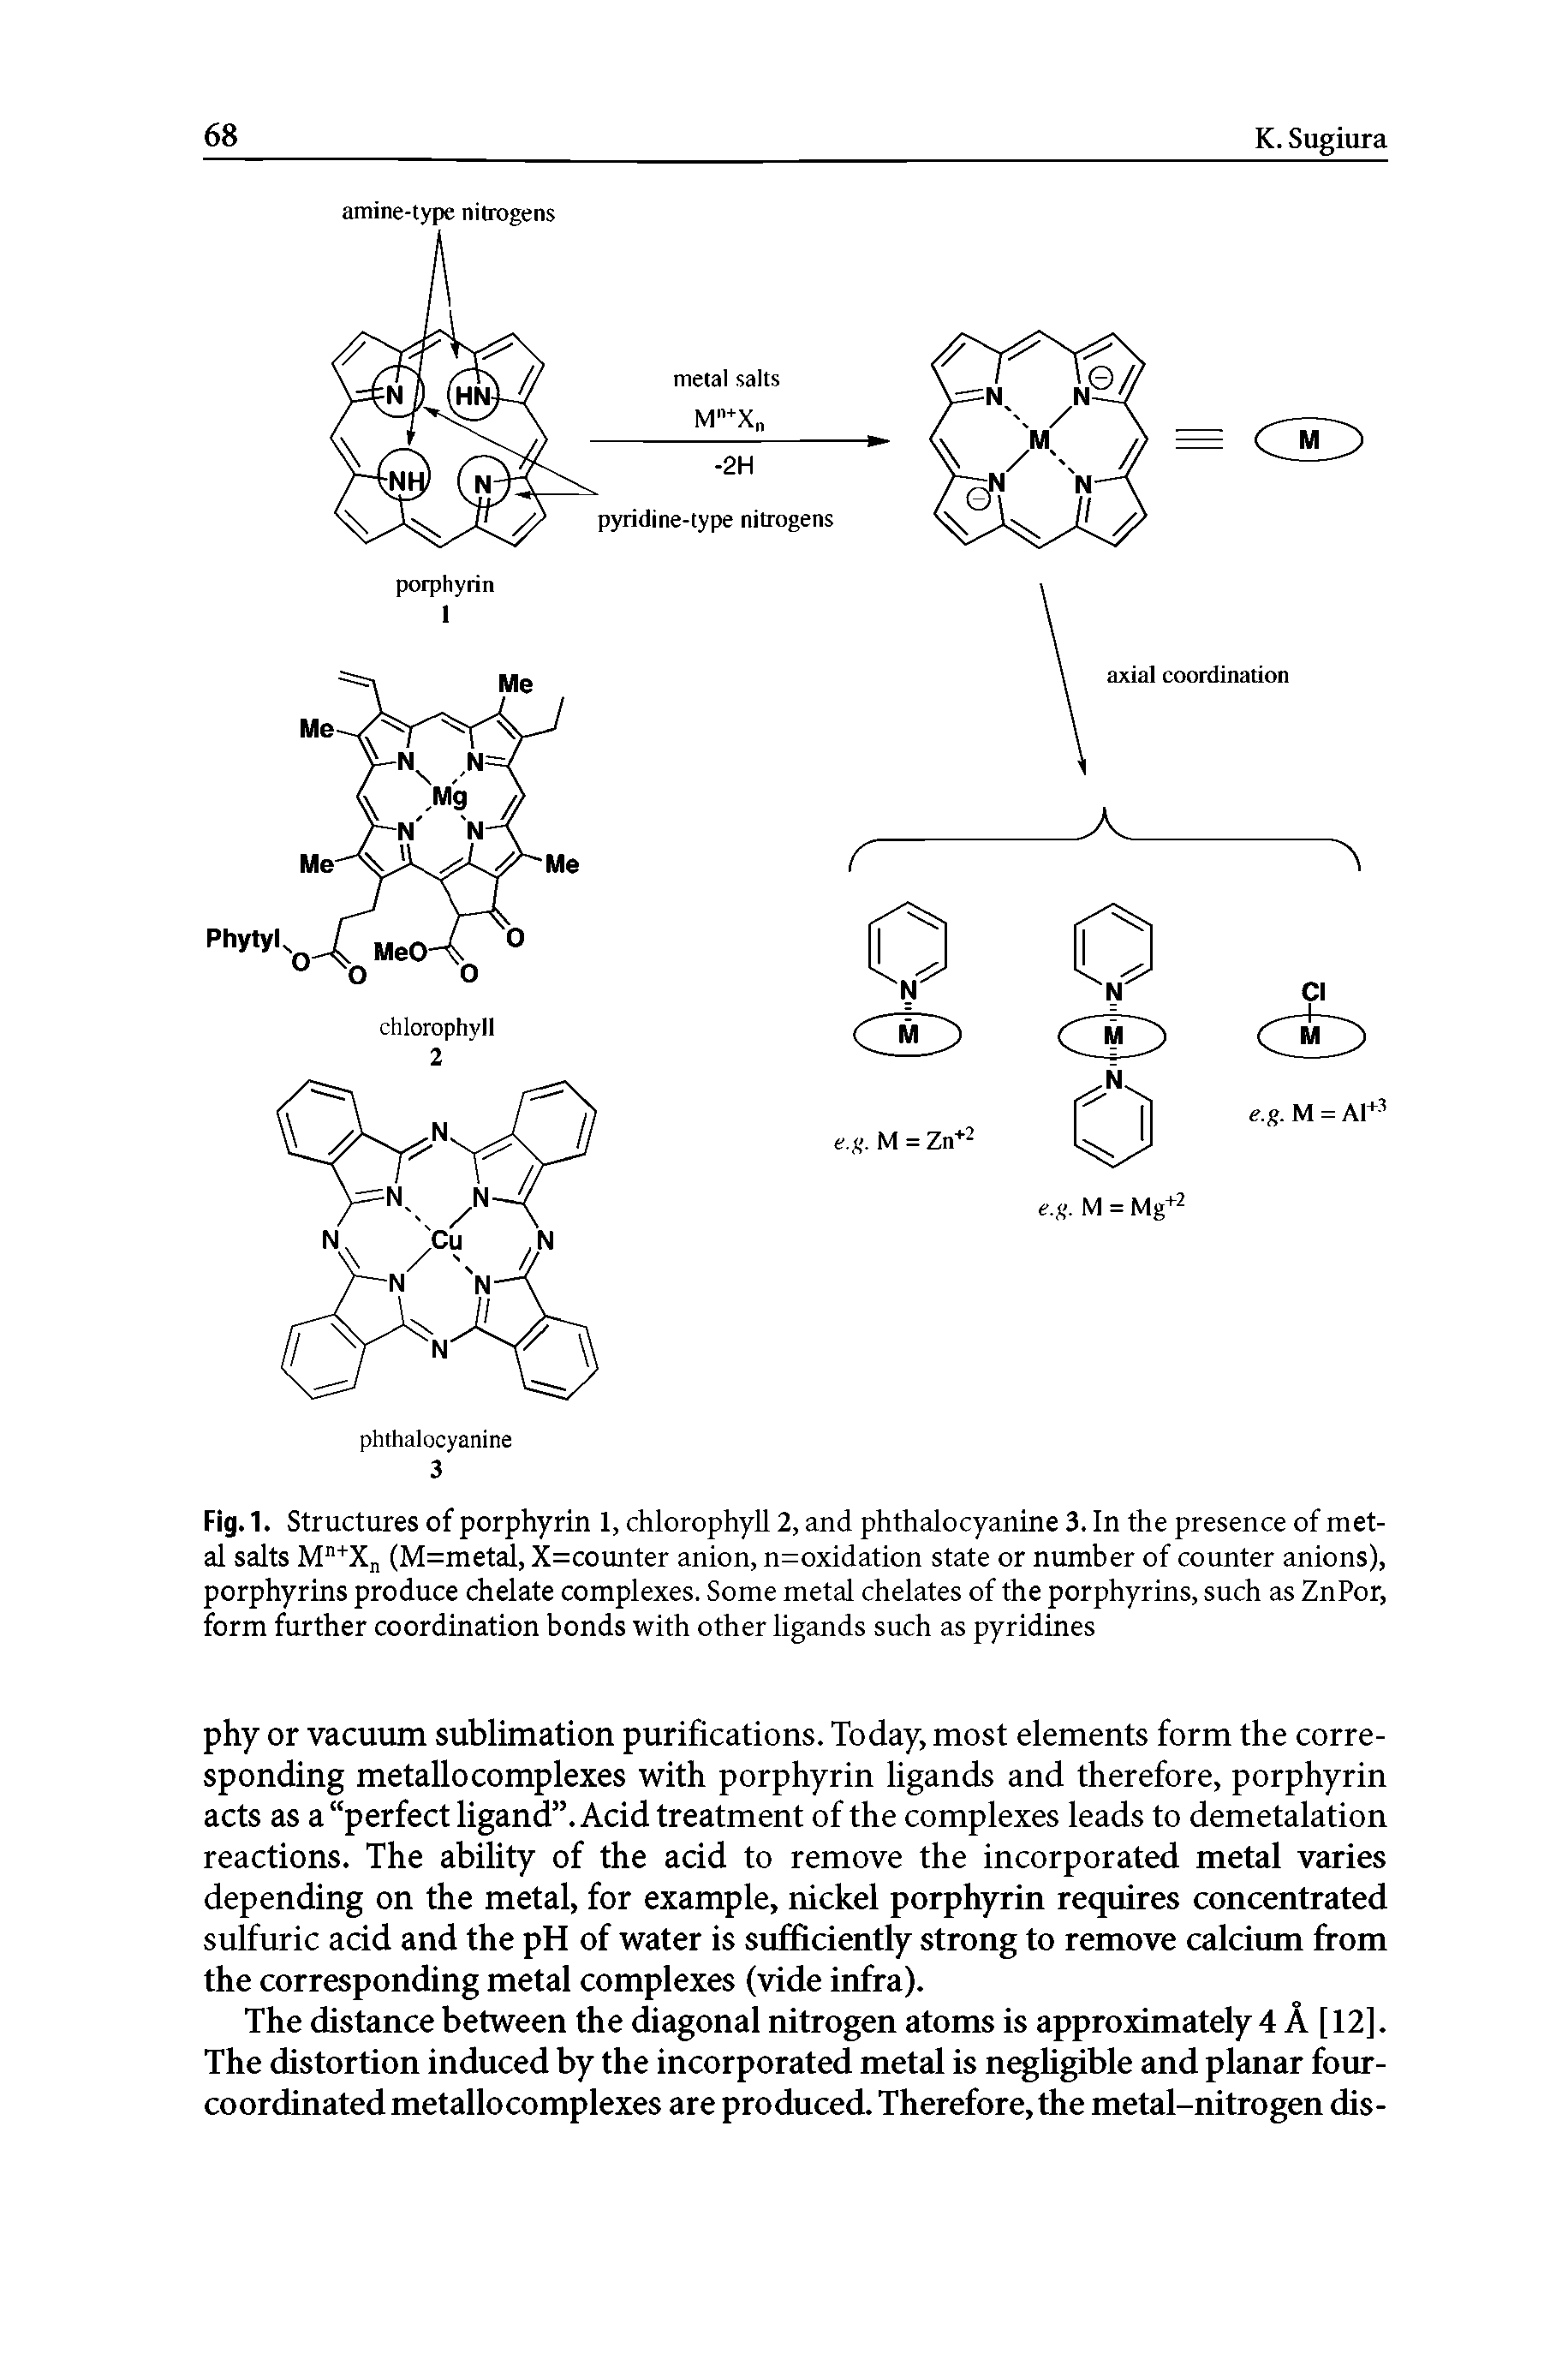 Fig.1. Structures of porphyrin 1, chlorophyll 2, and phthalocyanine 3. In the presence of metal salts M"+X (M=metal, X=counter anion, n=oxidation state or number of counter anions), porphyrins produce chelate complexes. Some metal chelates of the porphyrins, such as ZnPor, form further coordination bonds with other ligands such as pyridines...